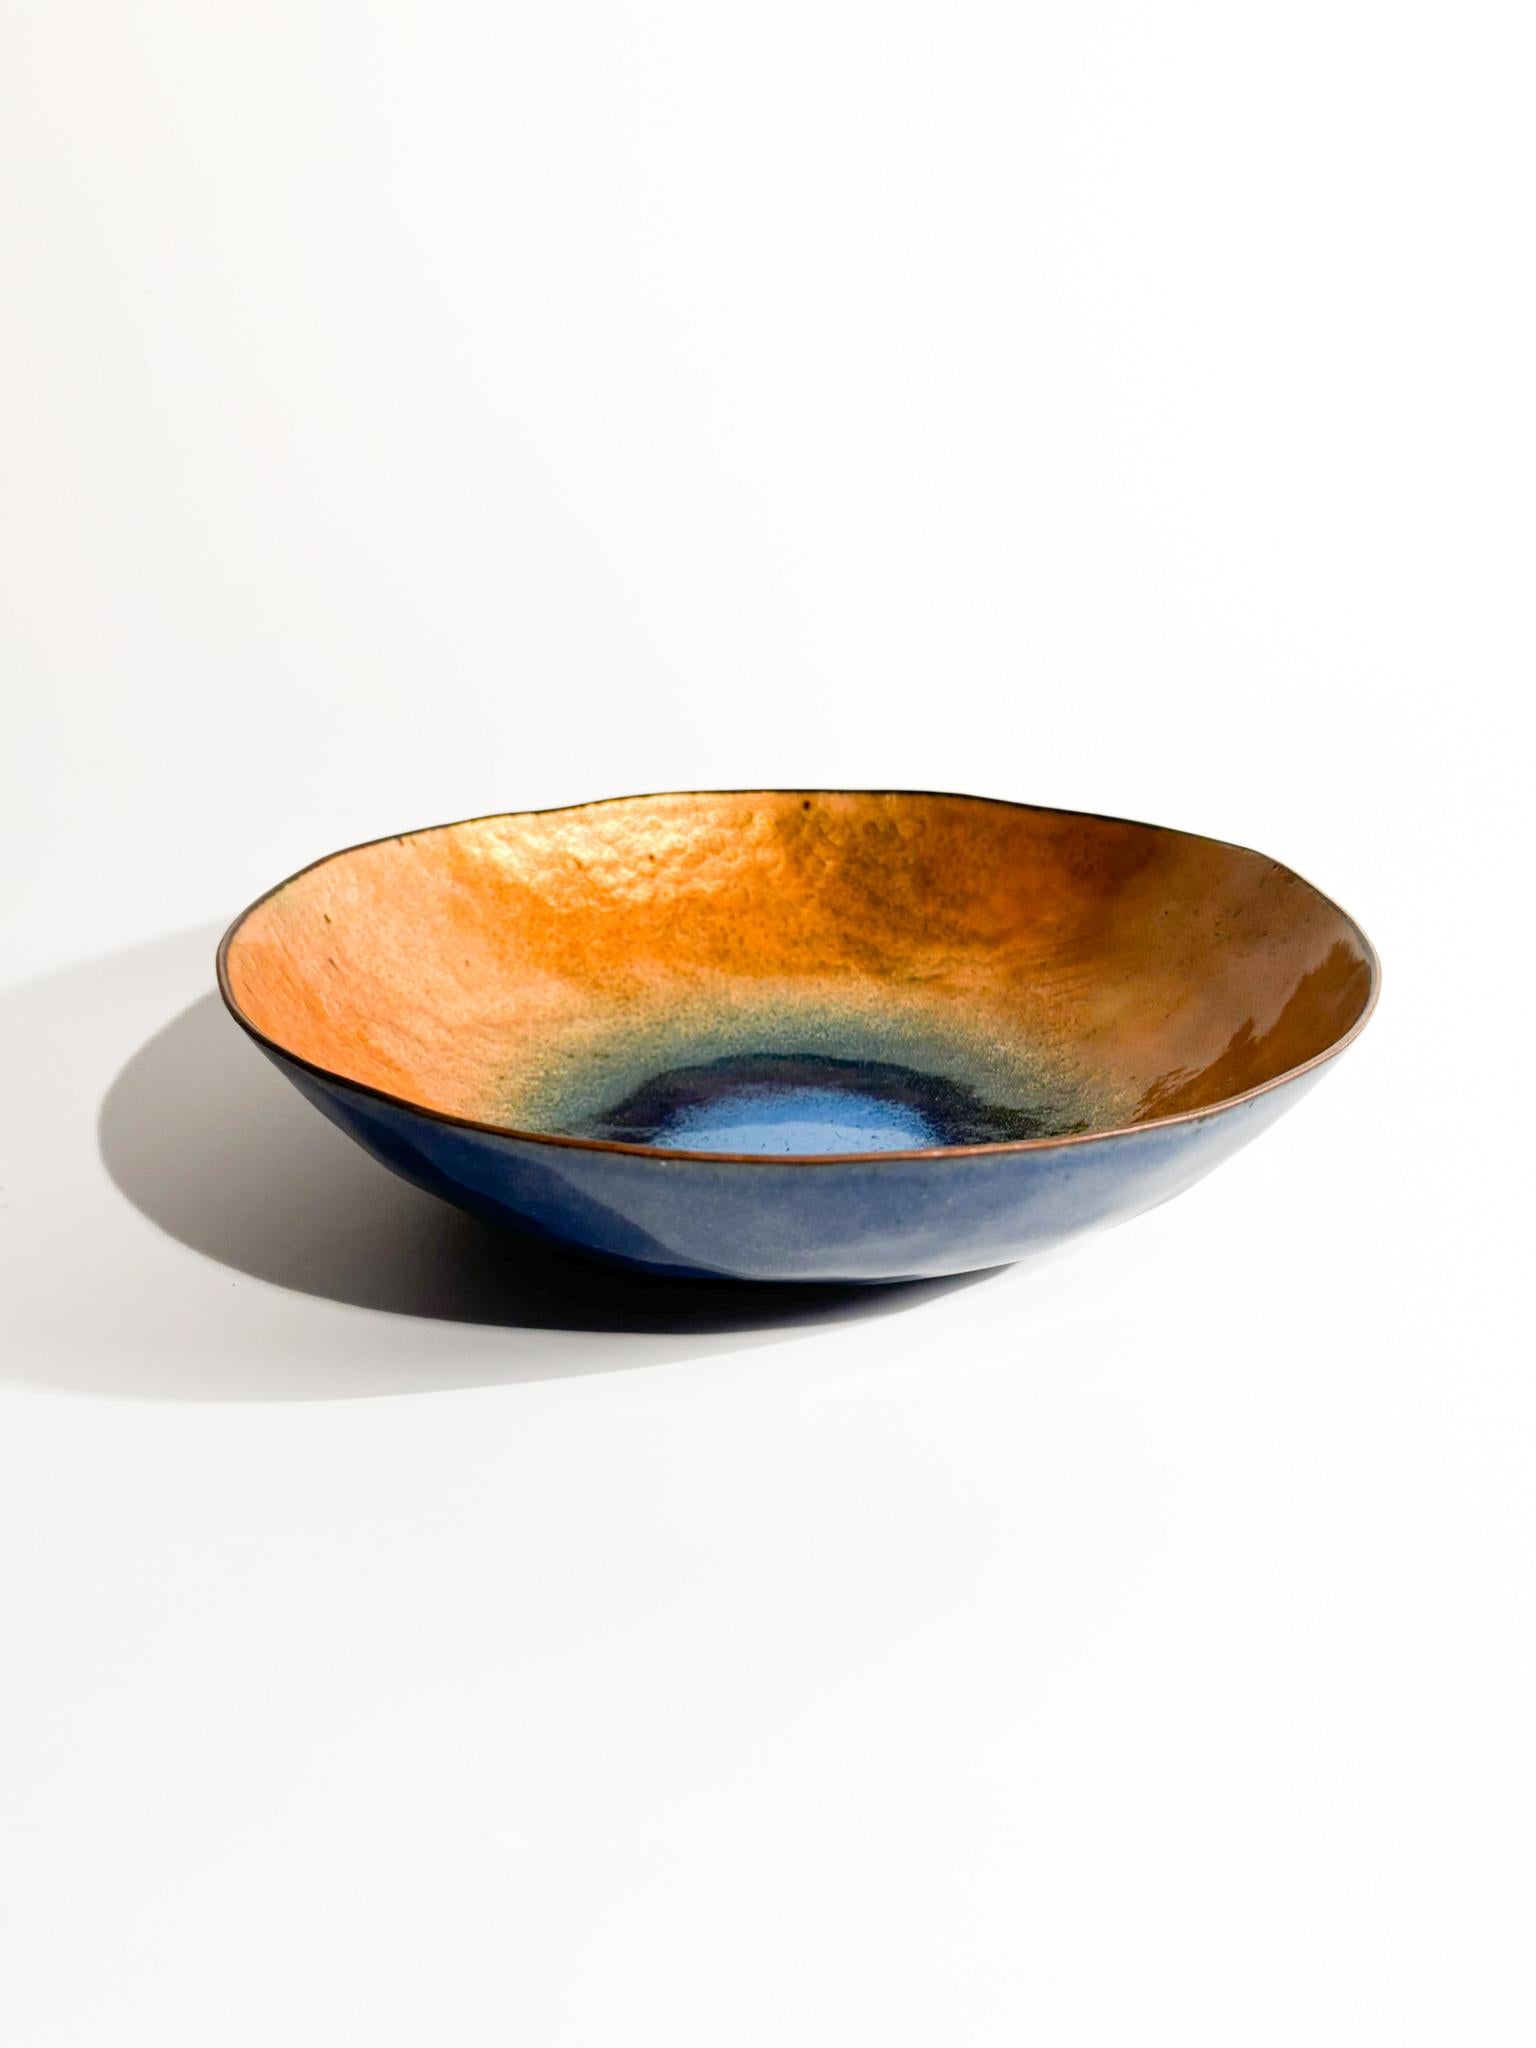 Italian Enamelled Copper Bowl by Paolo De Poli from the 1950s For Sale